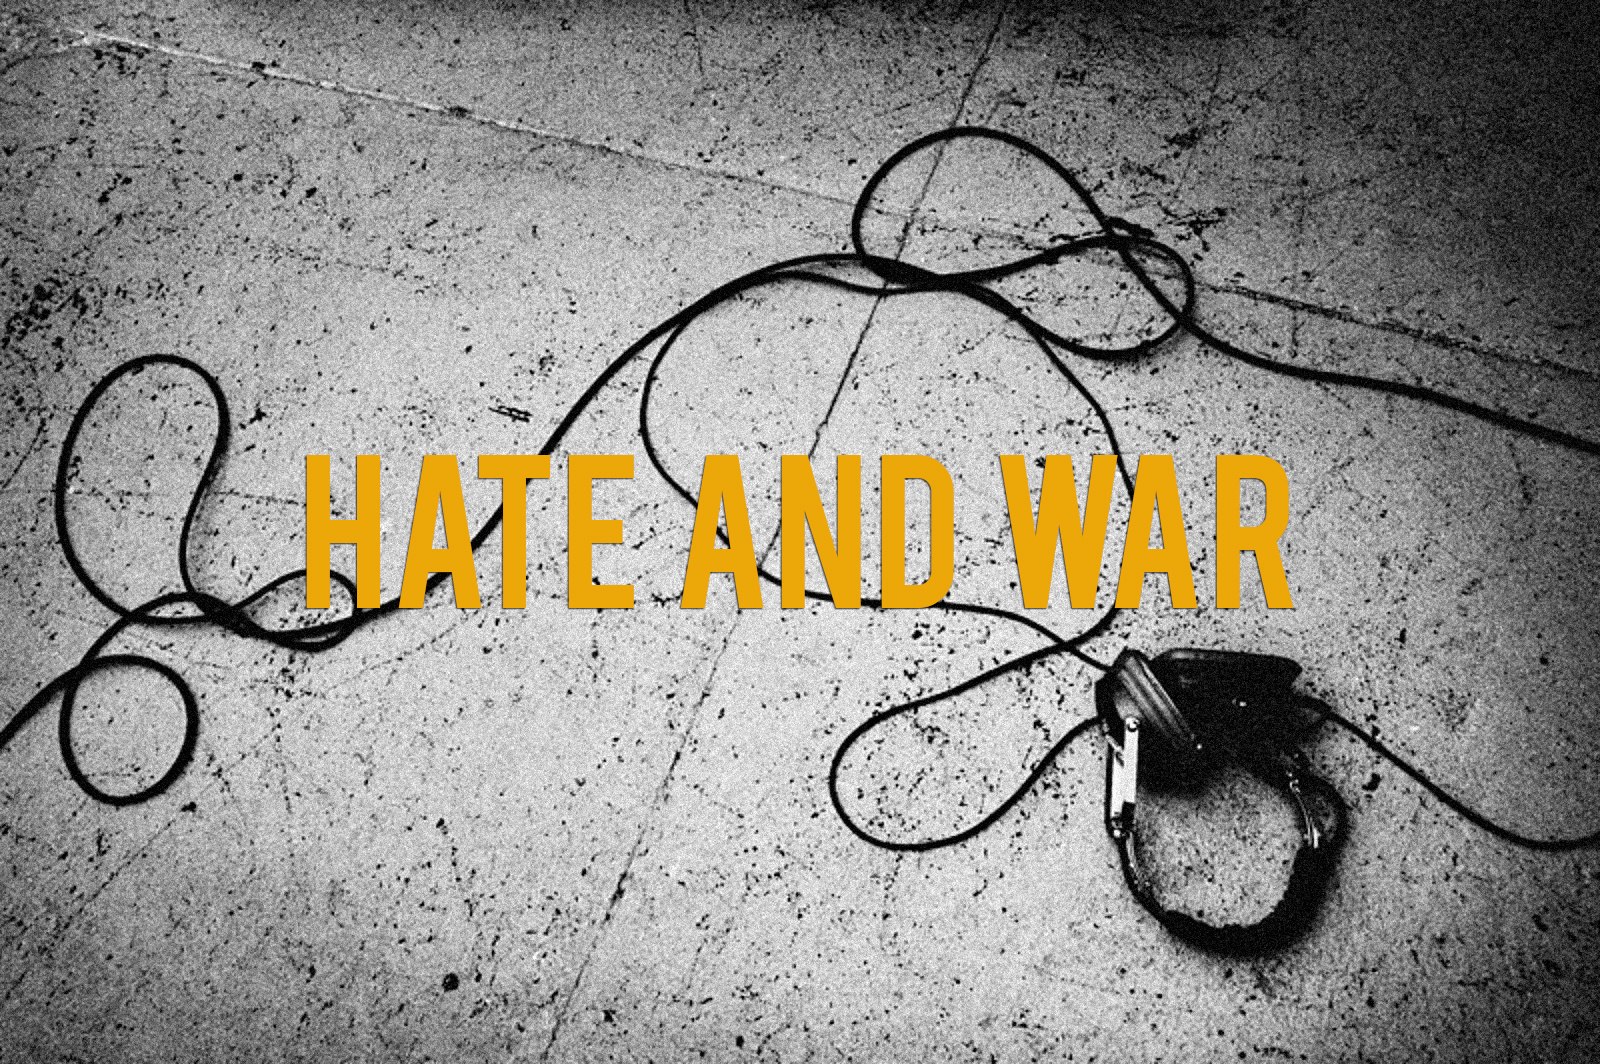 Hate And War - DeAltar